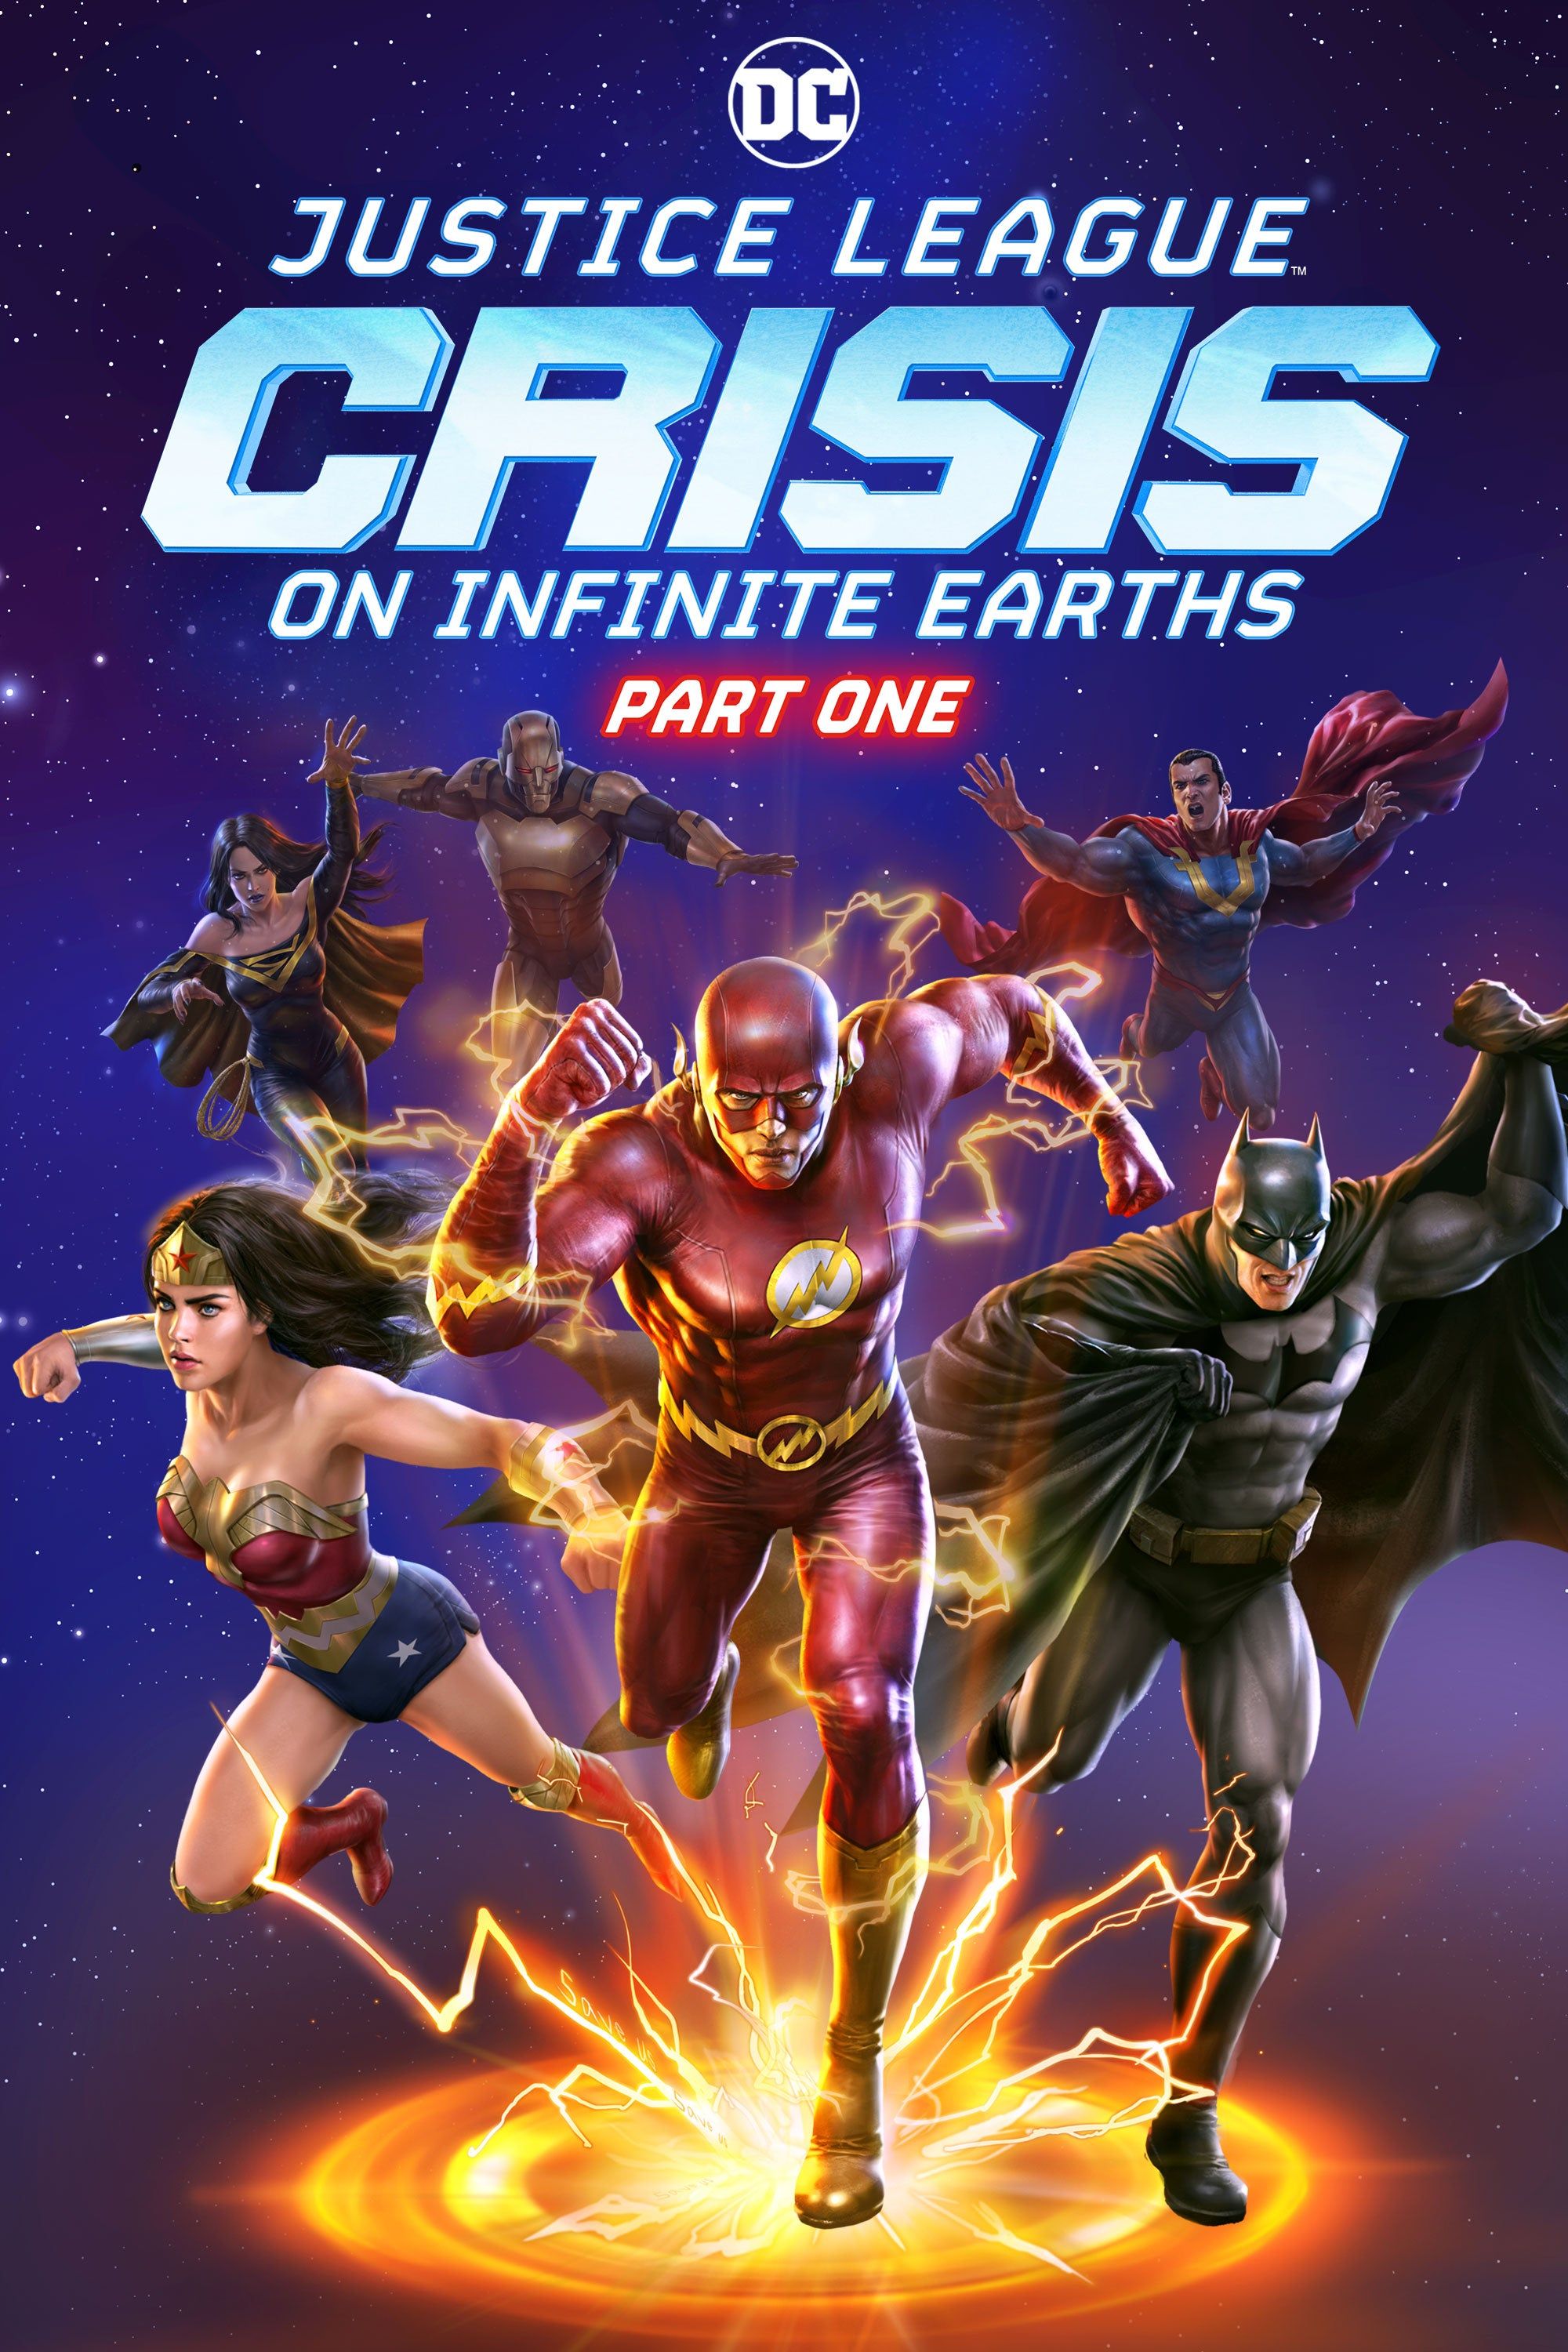 Wonder Woman, Flash, Batman, Superman, Supergirl/Harbinger and Amazo on the poster of Justice League- Crisis on Infinite Earths Part One